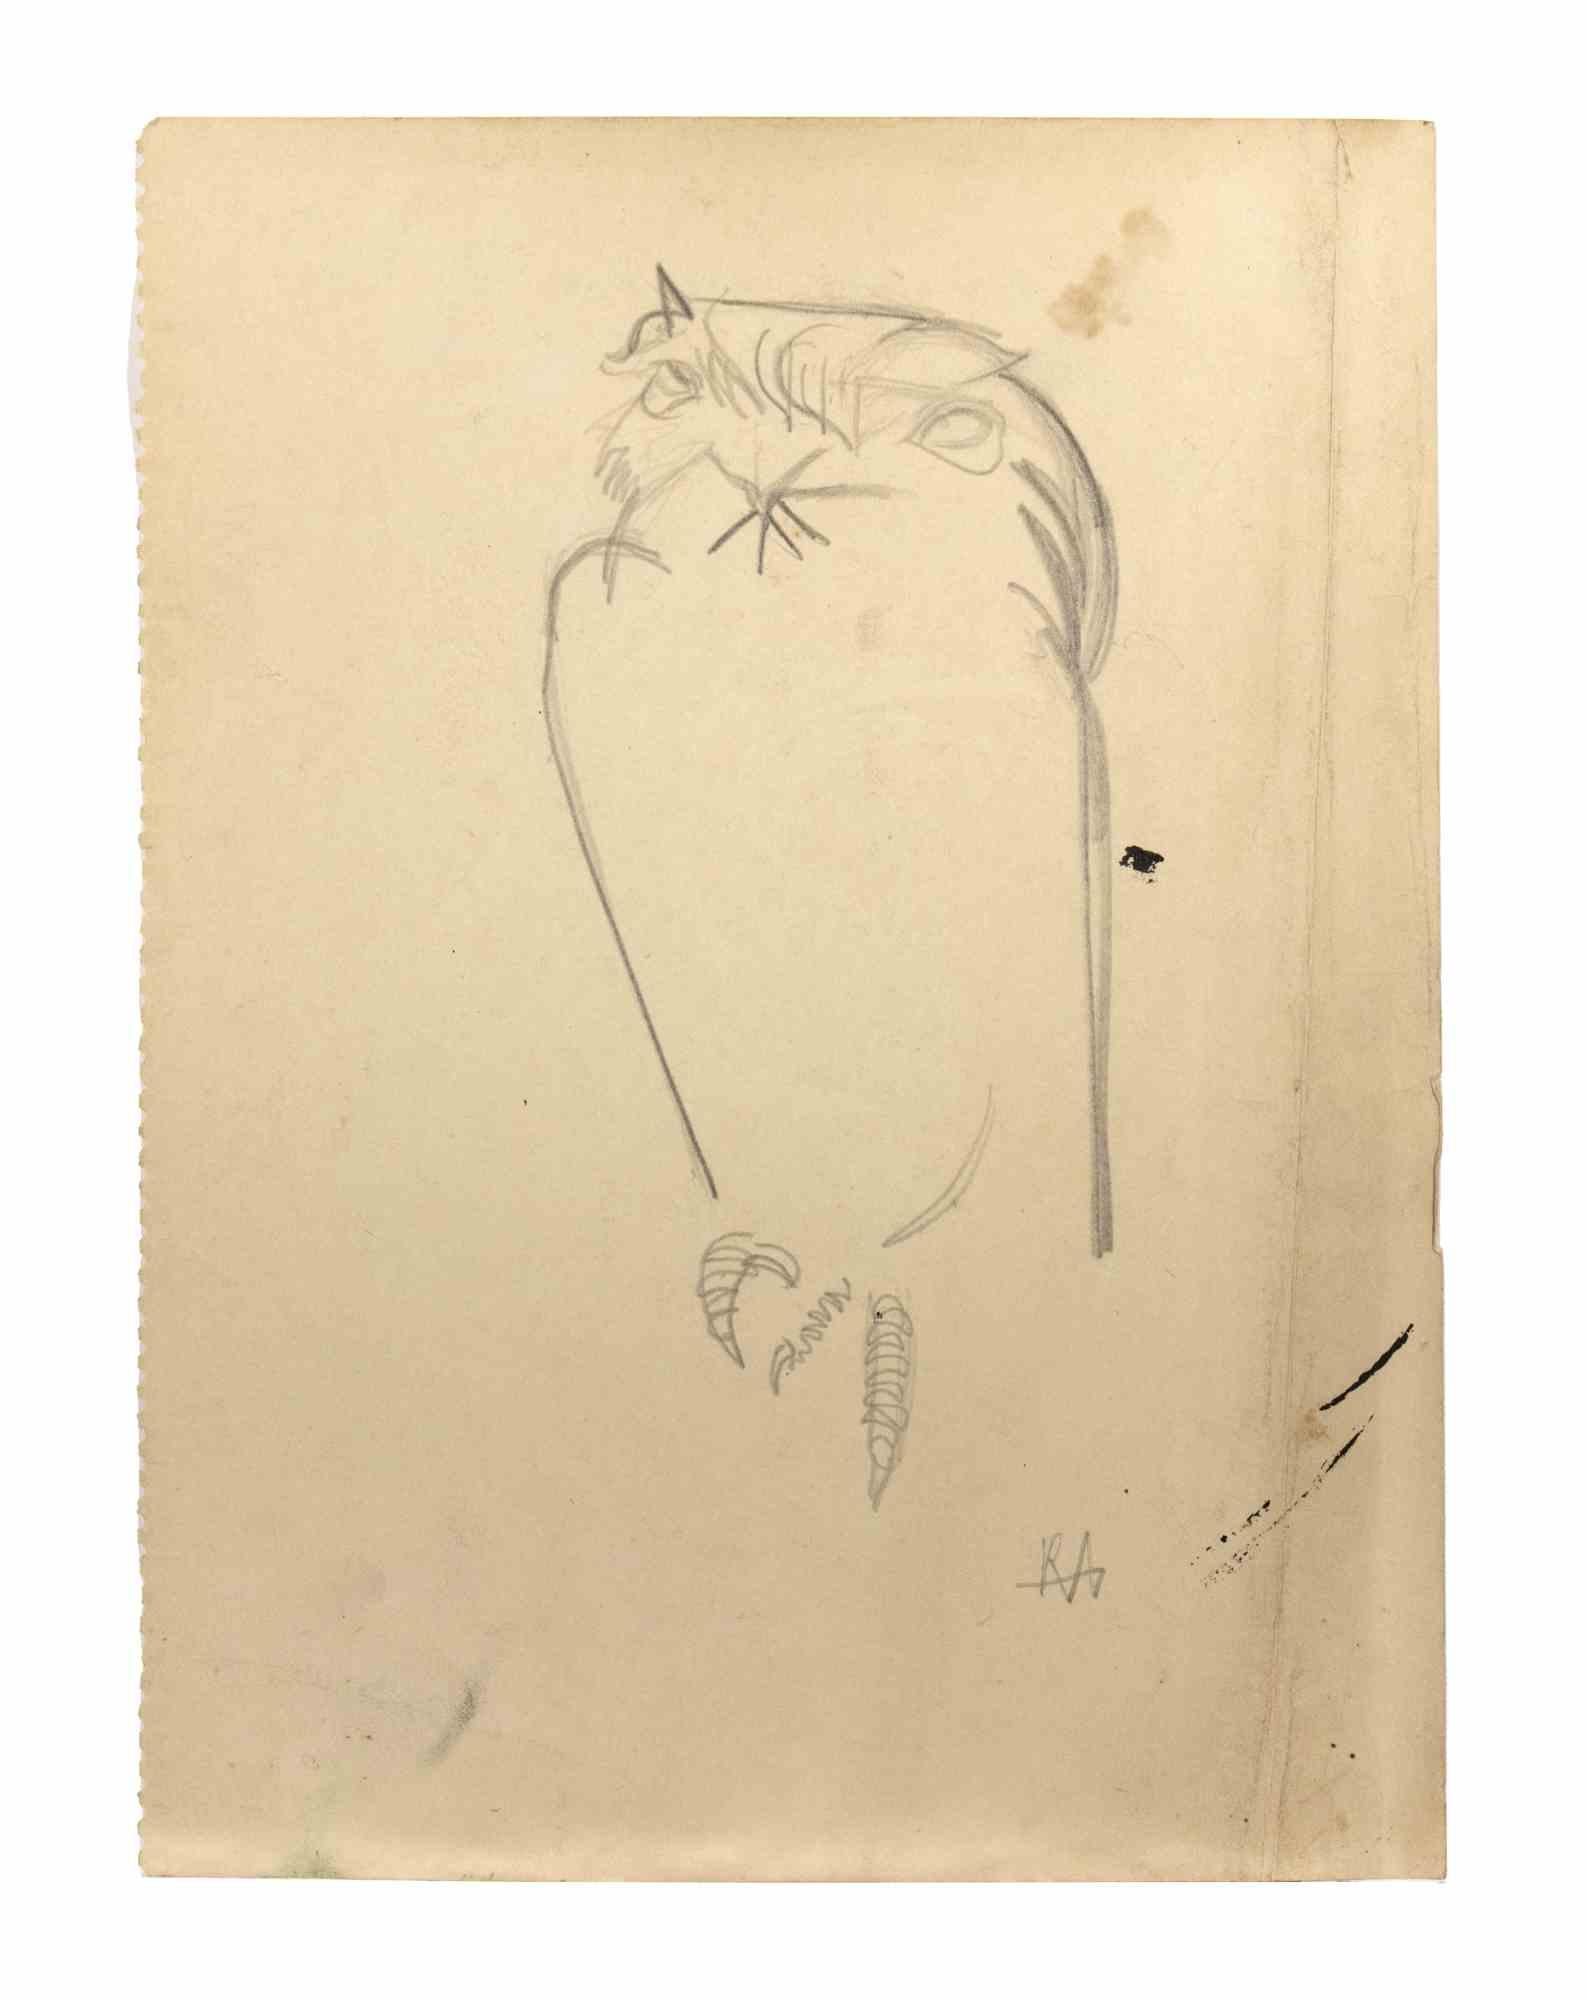 Owl is a pencil drawing realized by Reynold Arnould  (Le Havre 1919 - Parigi 1980).

Good condition on a yellowed paper, monogrammed by the artist on the lower right corner.

The drawing represents an Owl, and two owls on the back, included a white